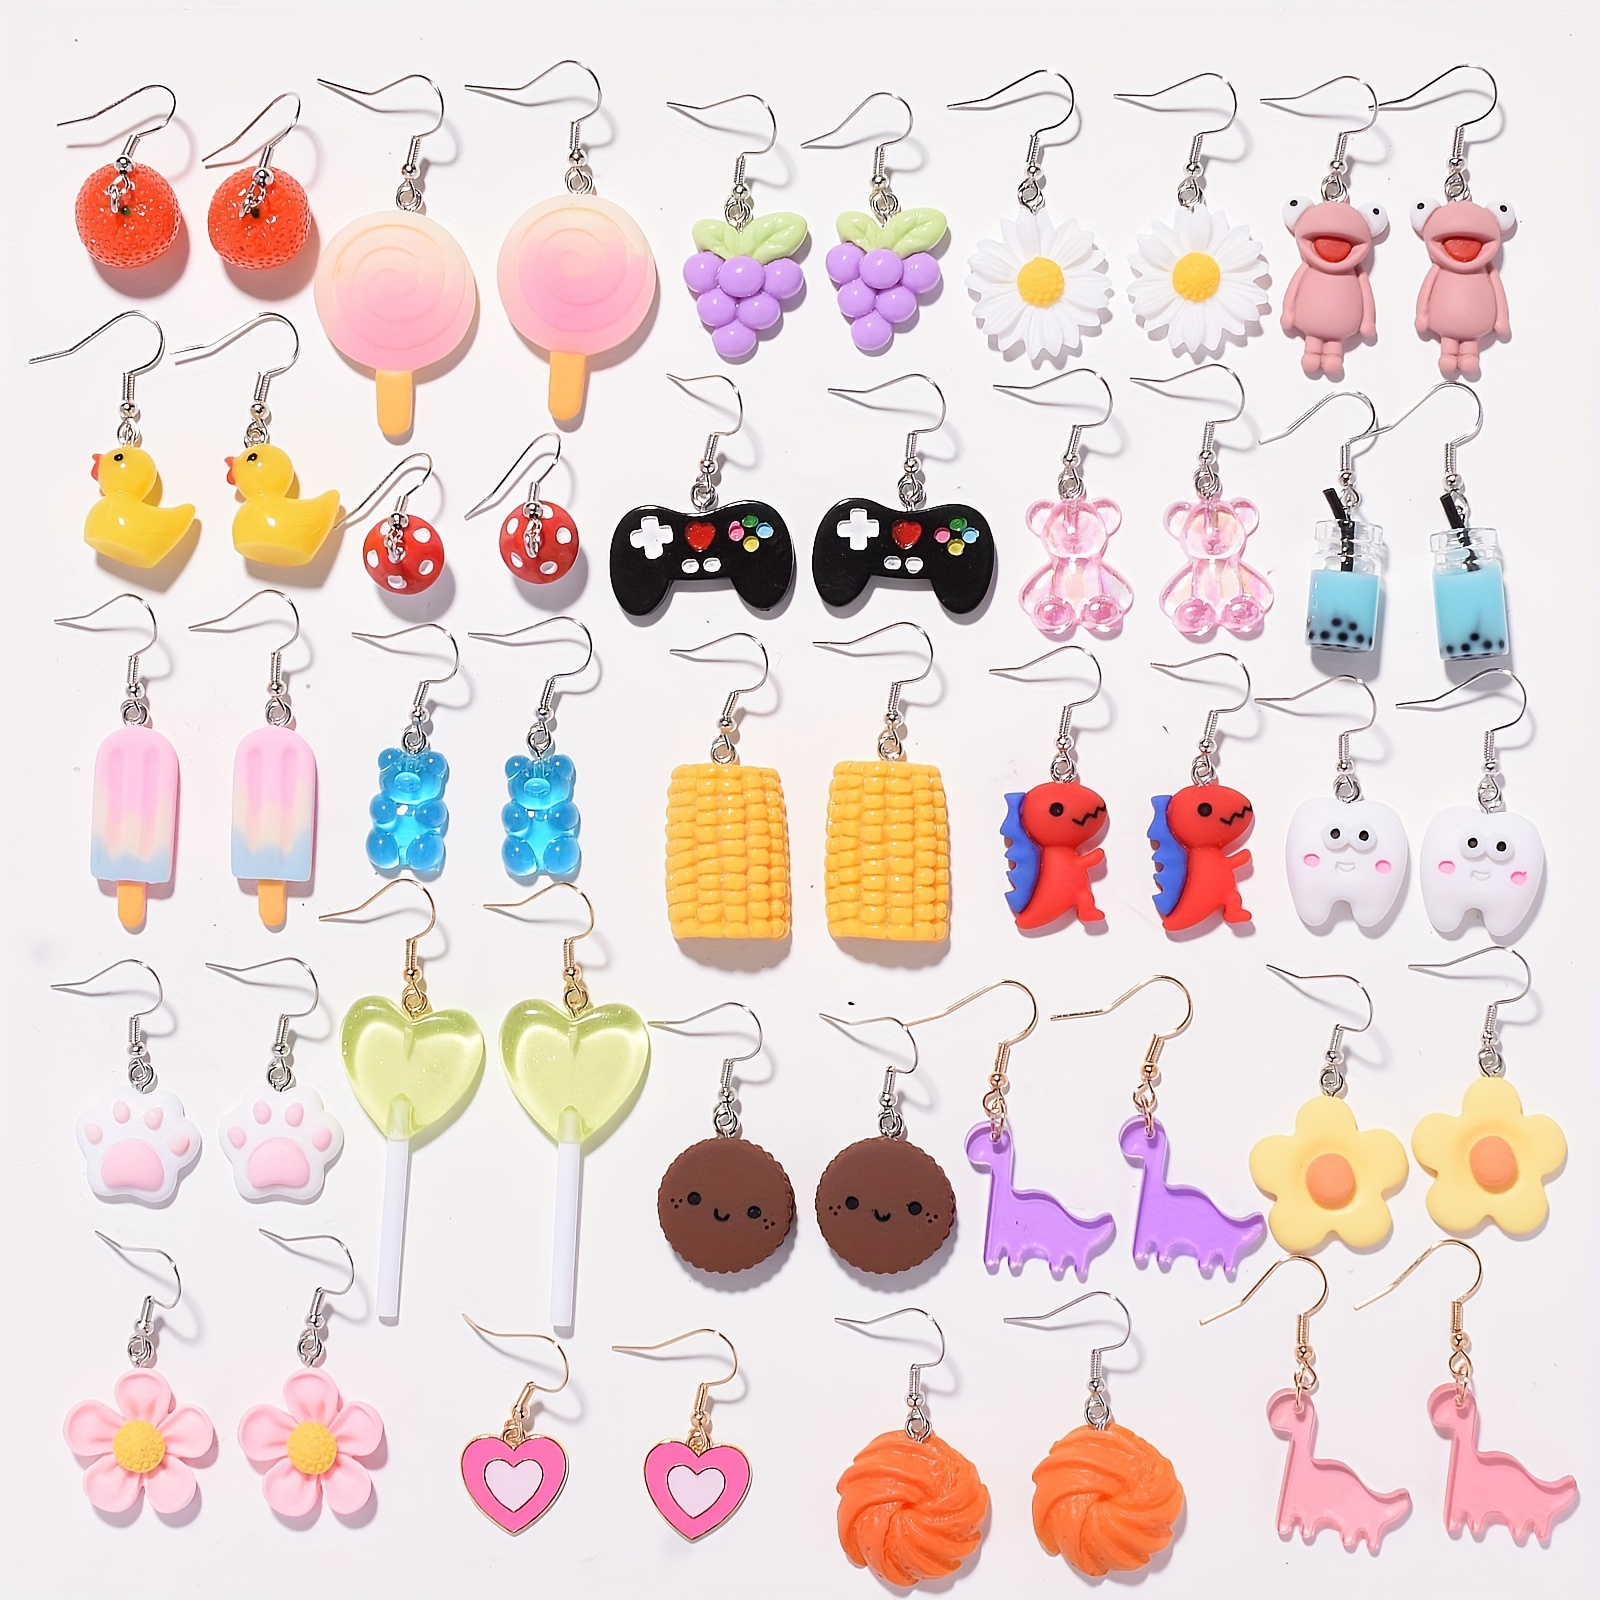 

48pcs Fashion And Cute Cartoon Beads Pendant Earrings, Versatile And Easy-to-wear, Combine Well With Any Outfit